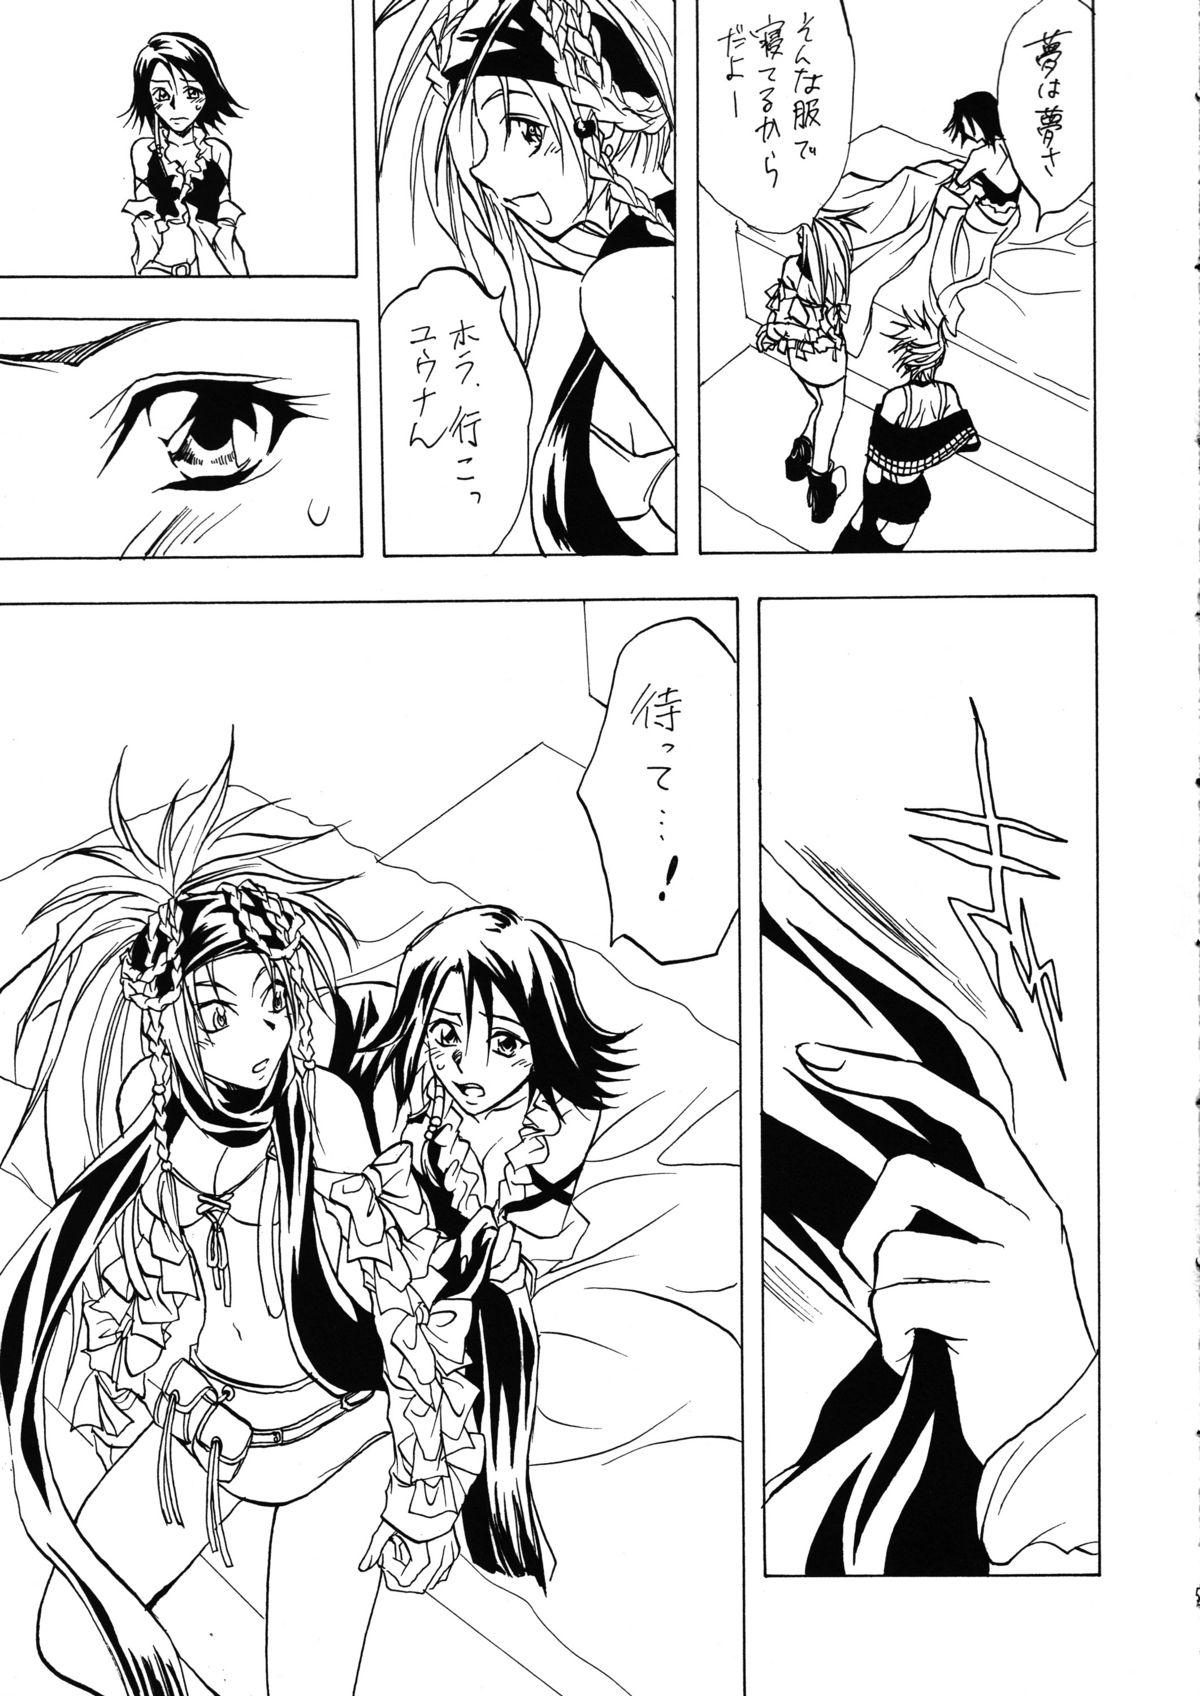 Whipping Sennen No Koi 2 - Final fantasy x-2 Hot Girl Pussy - Page 6